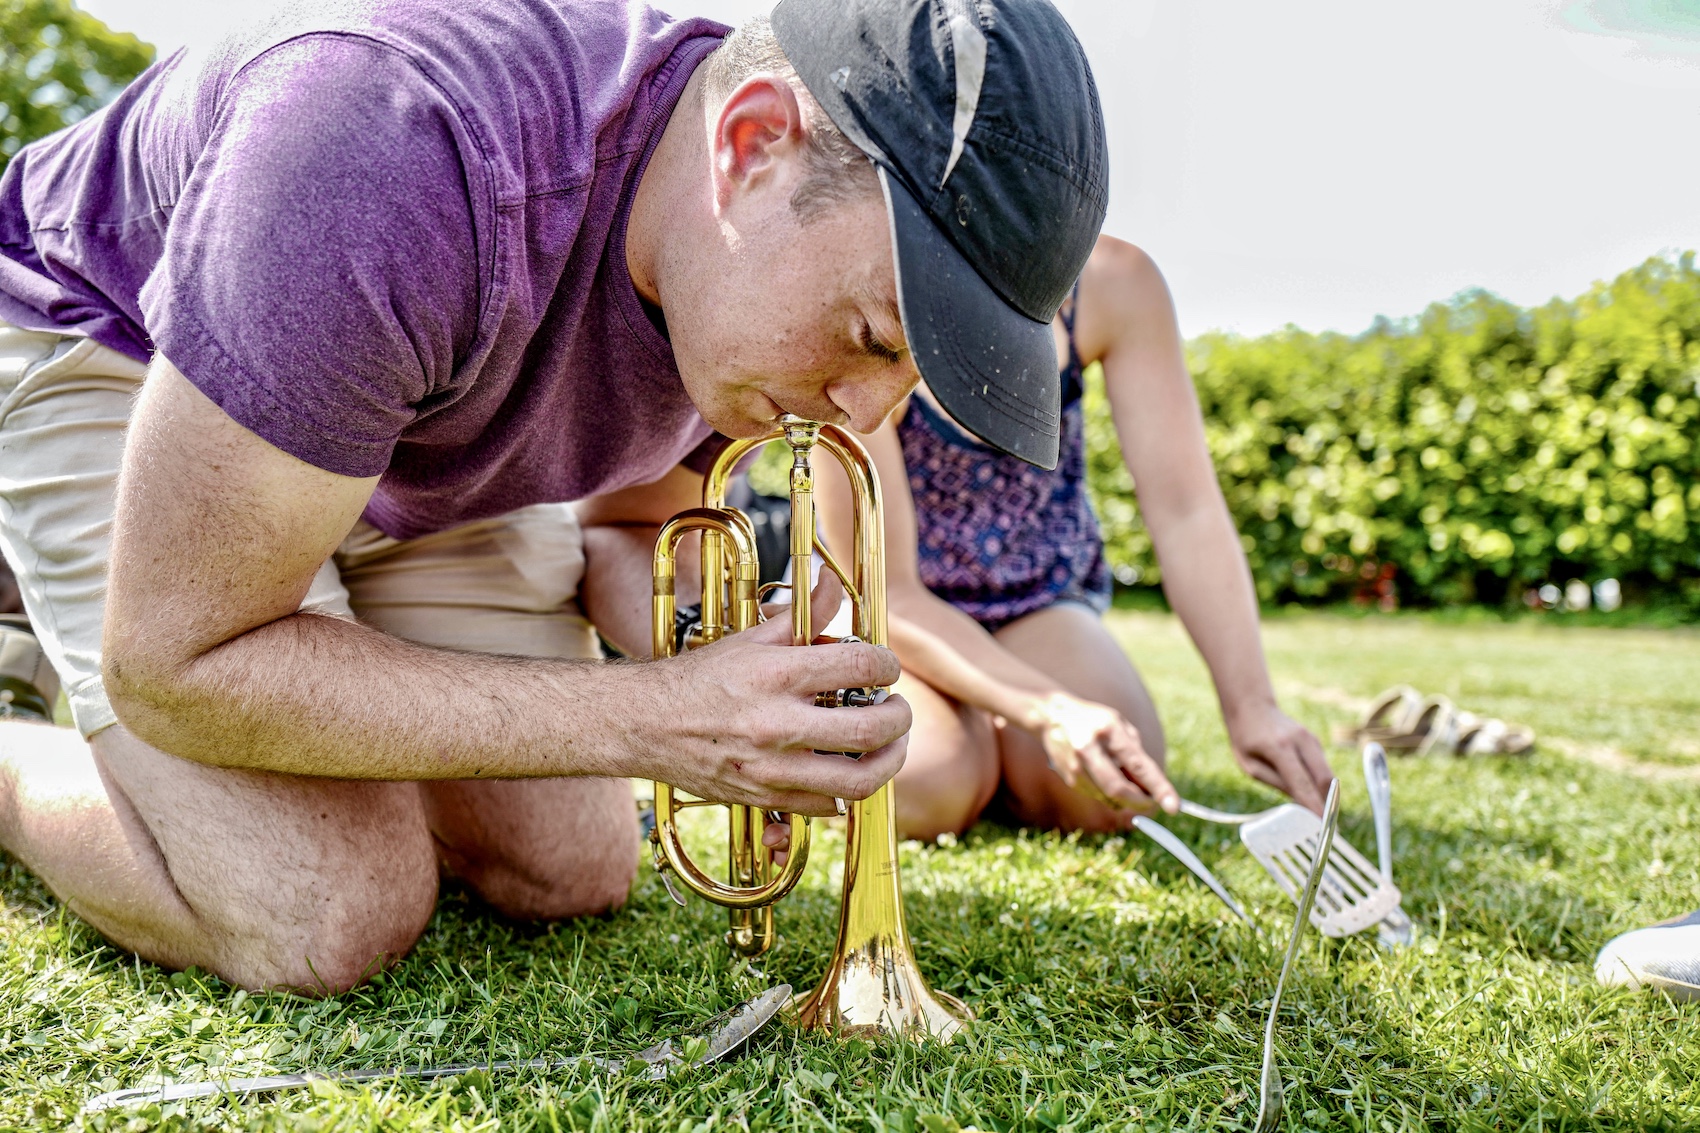 A competitor uses a trumpet to lure worms